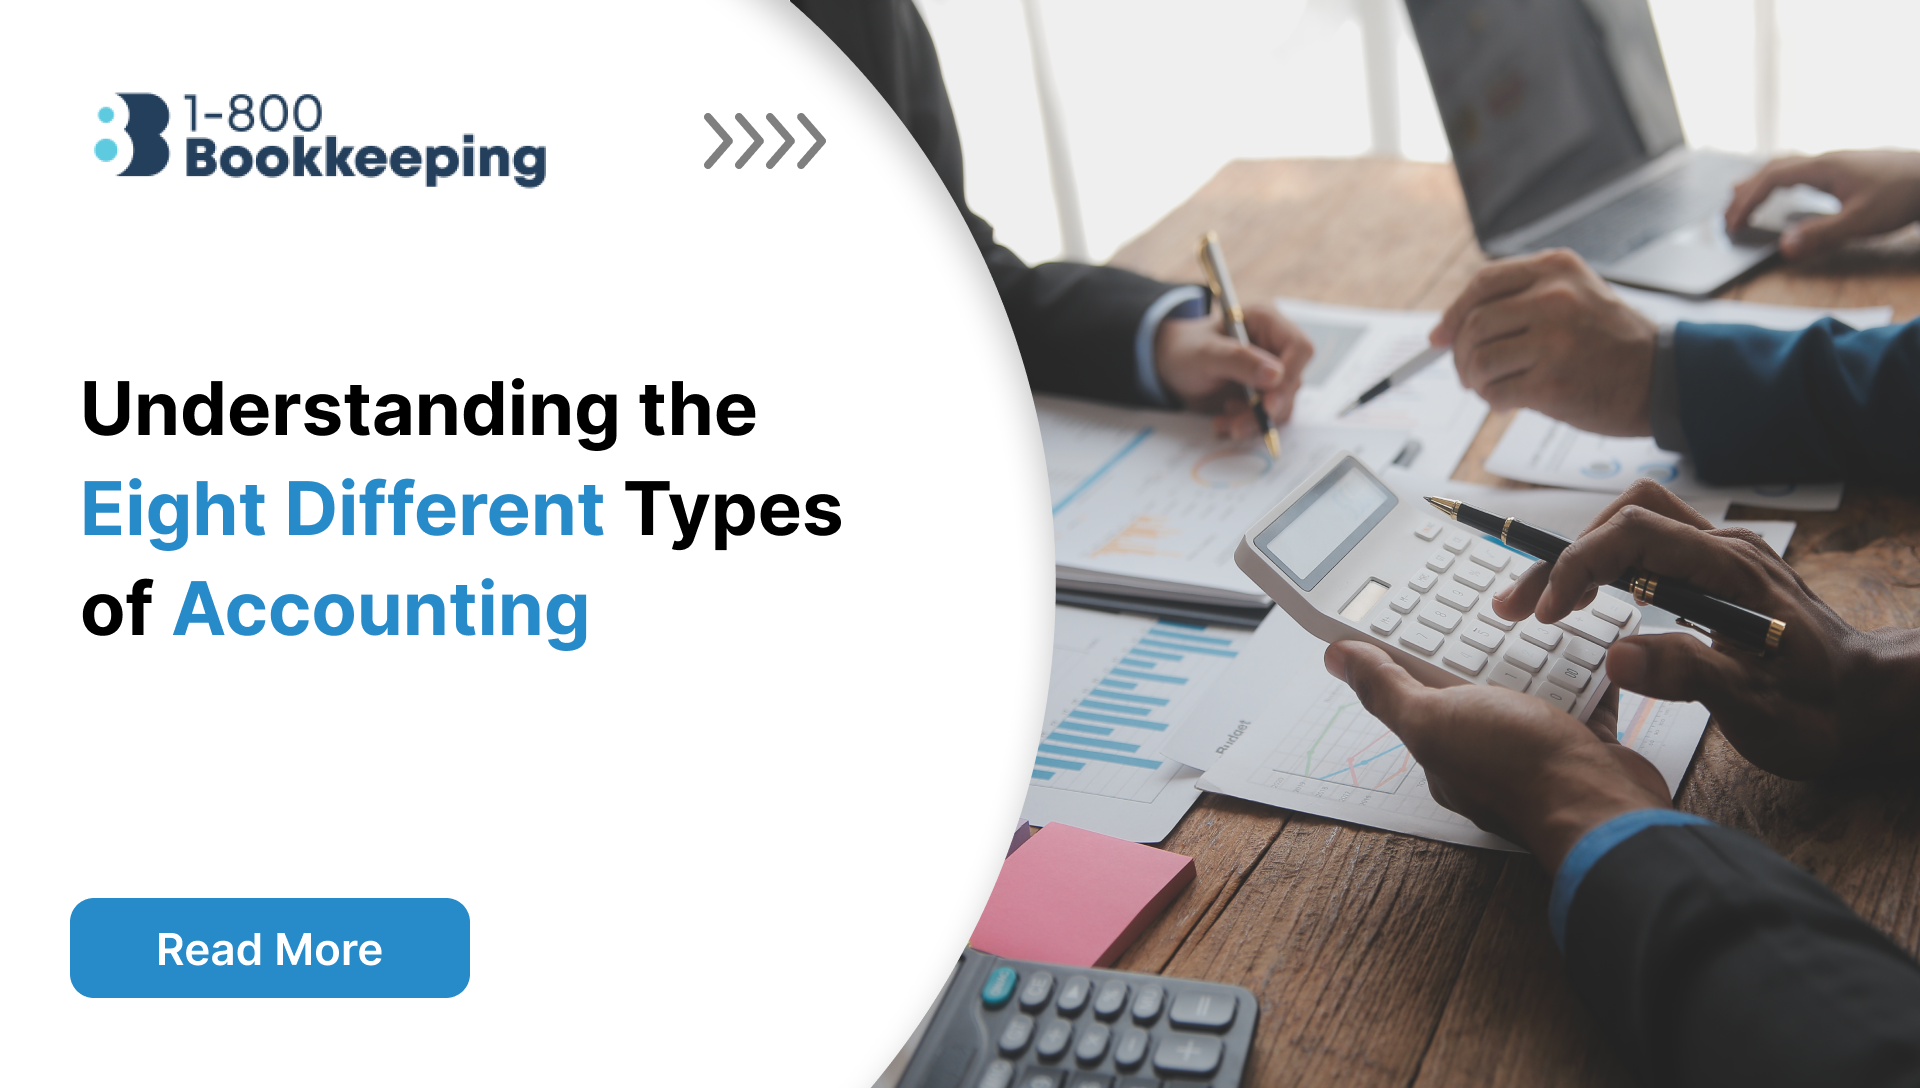 Understanding the Eight Different Types of Accounting